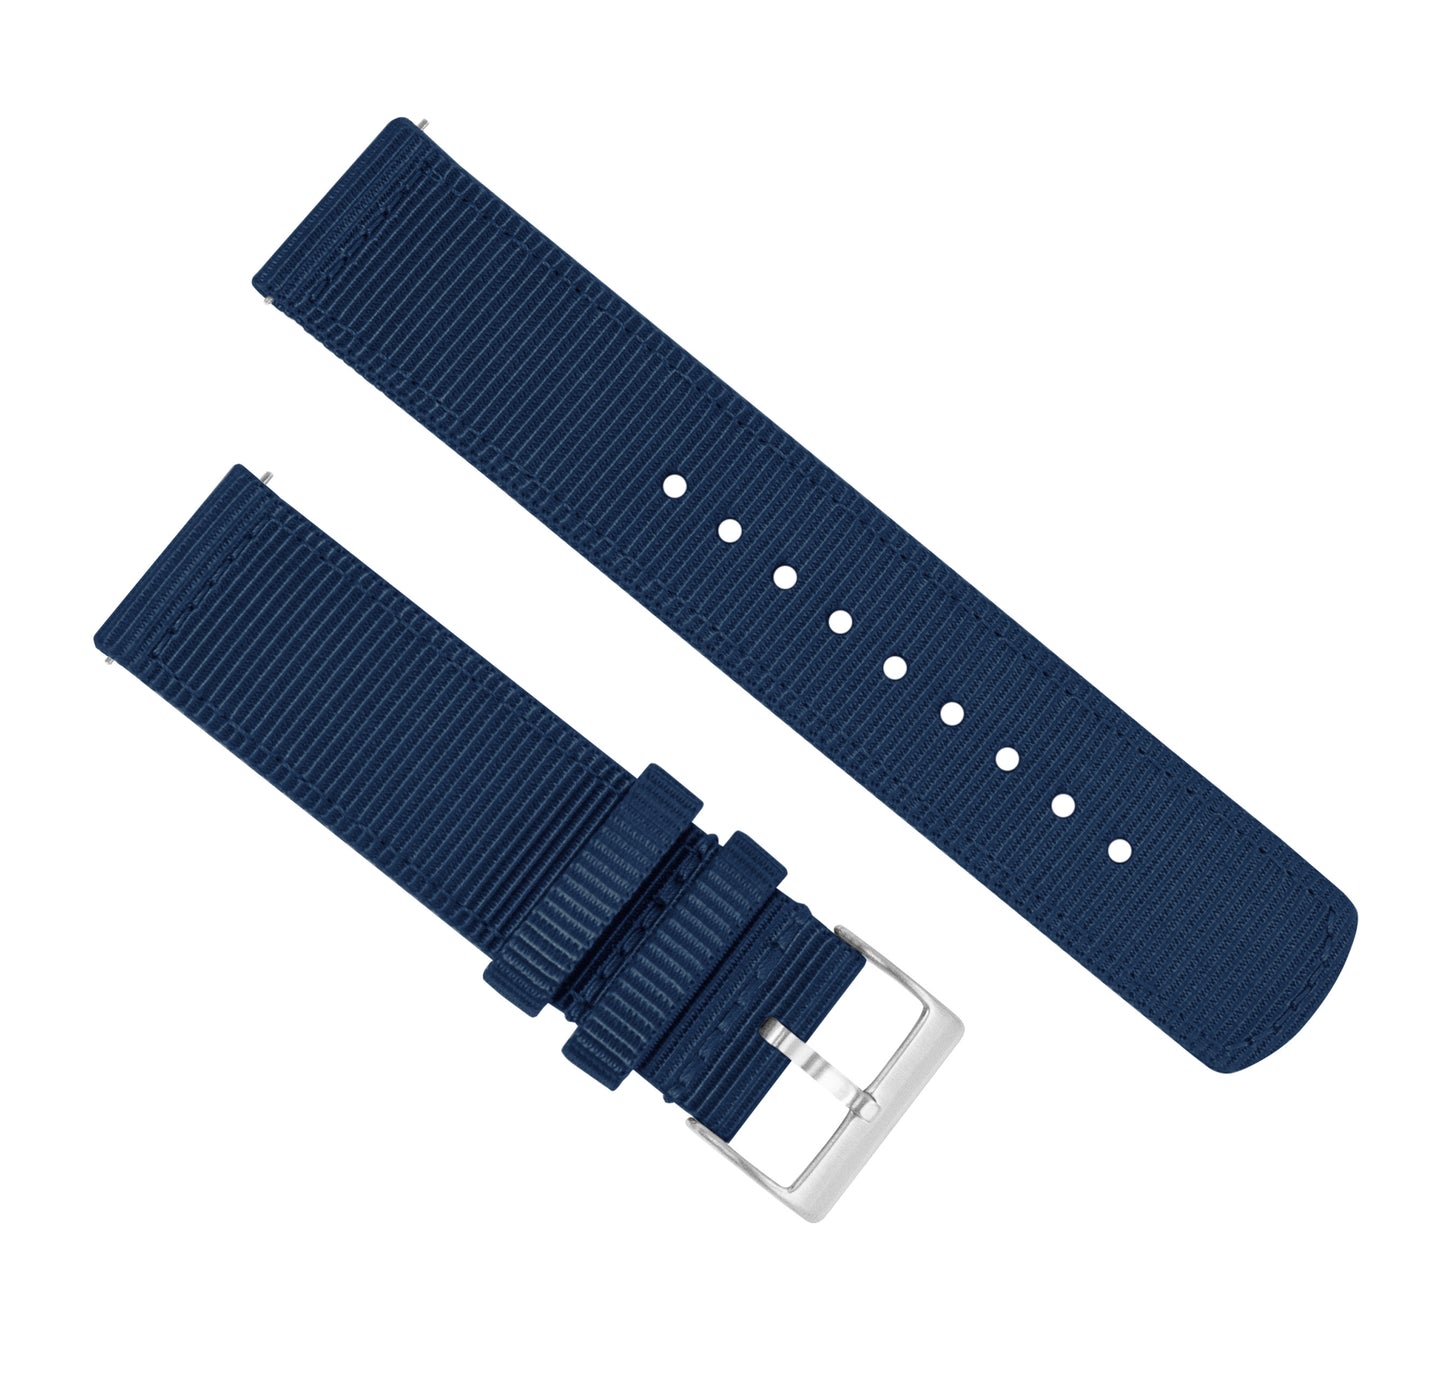 Fossil Gen 5 | Two-Piece NATO Style | Navy Blue - Barton Watch Bands